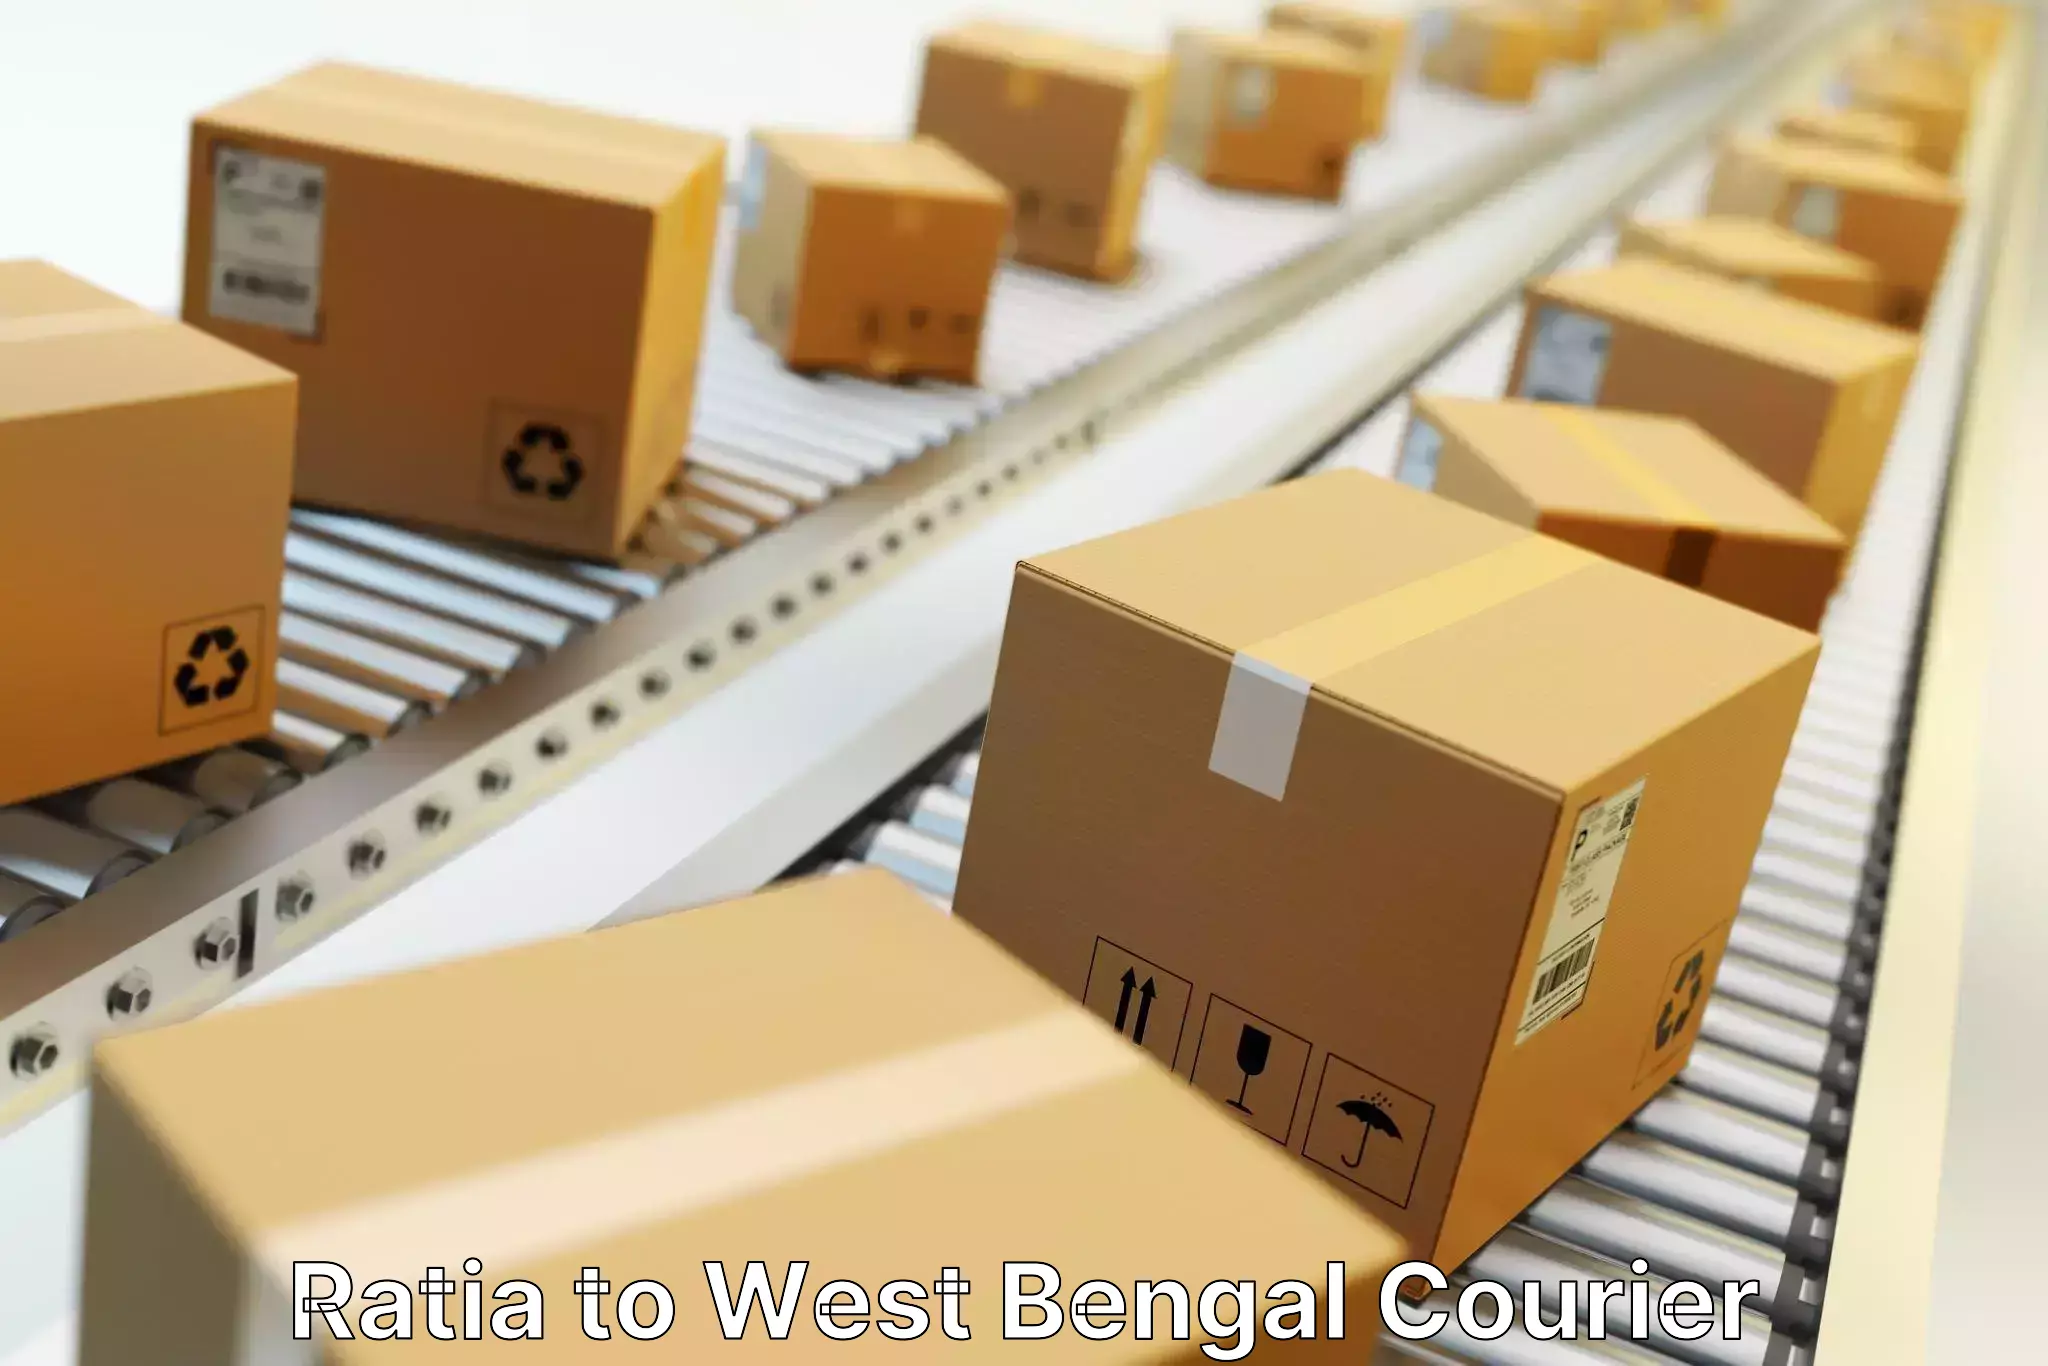 Delivery service partnership Ratia to West Bengal